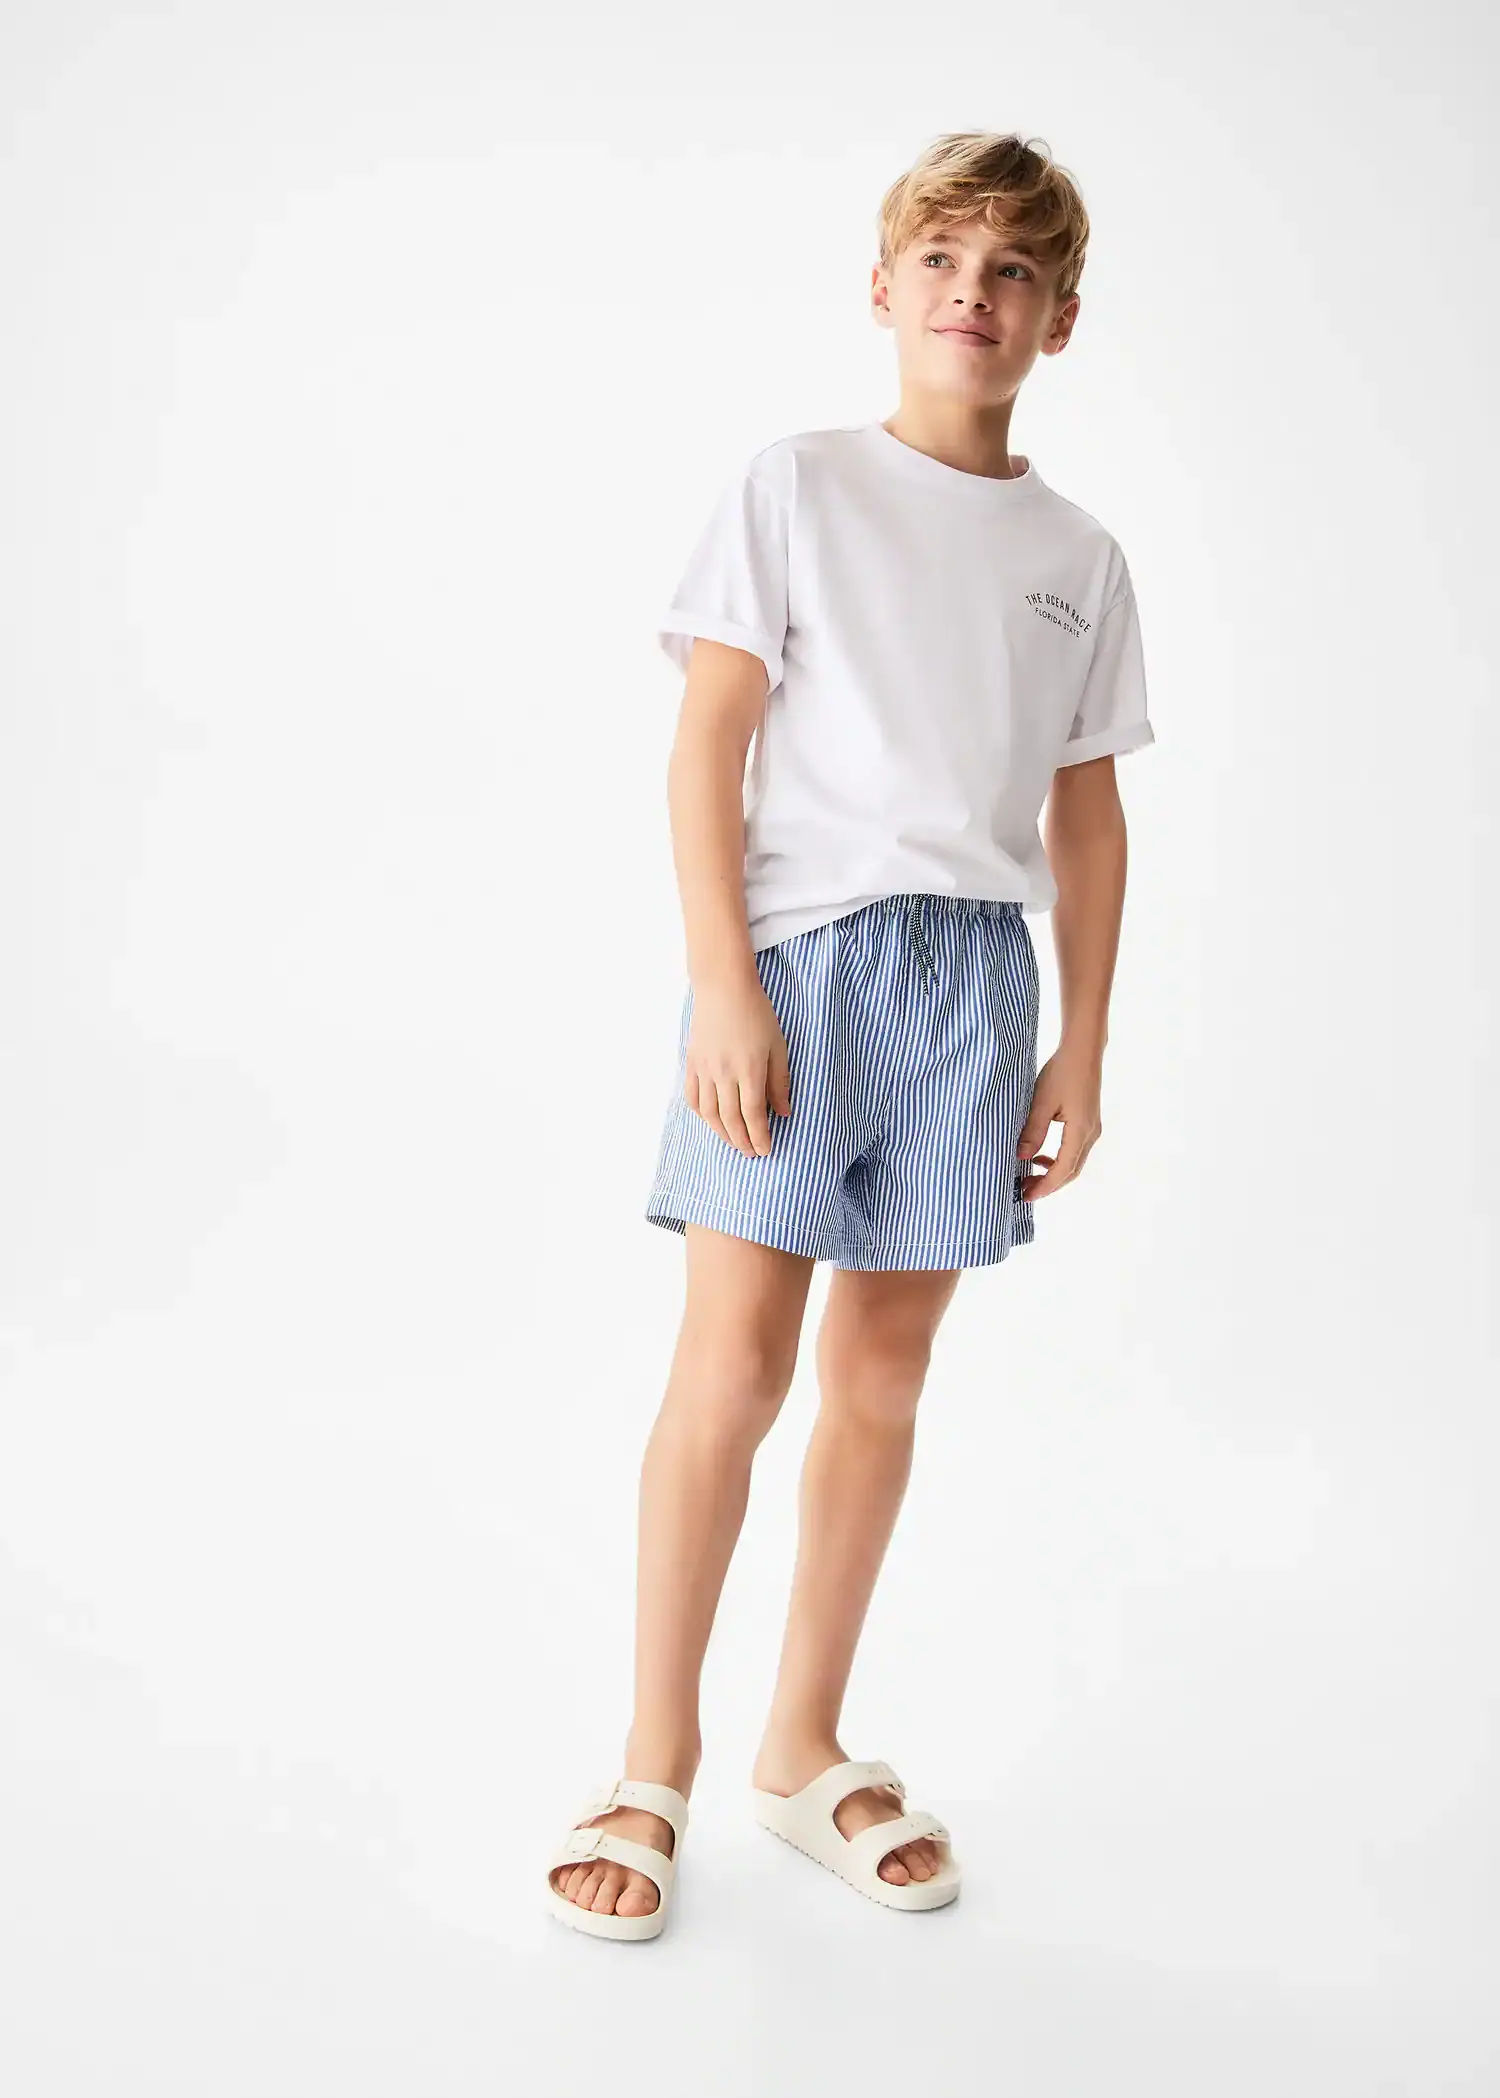 Mango KIDS/ Striped swimsuit. a young man in a white t-shirt and light blue shorts. 